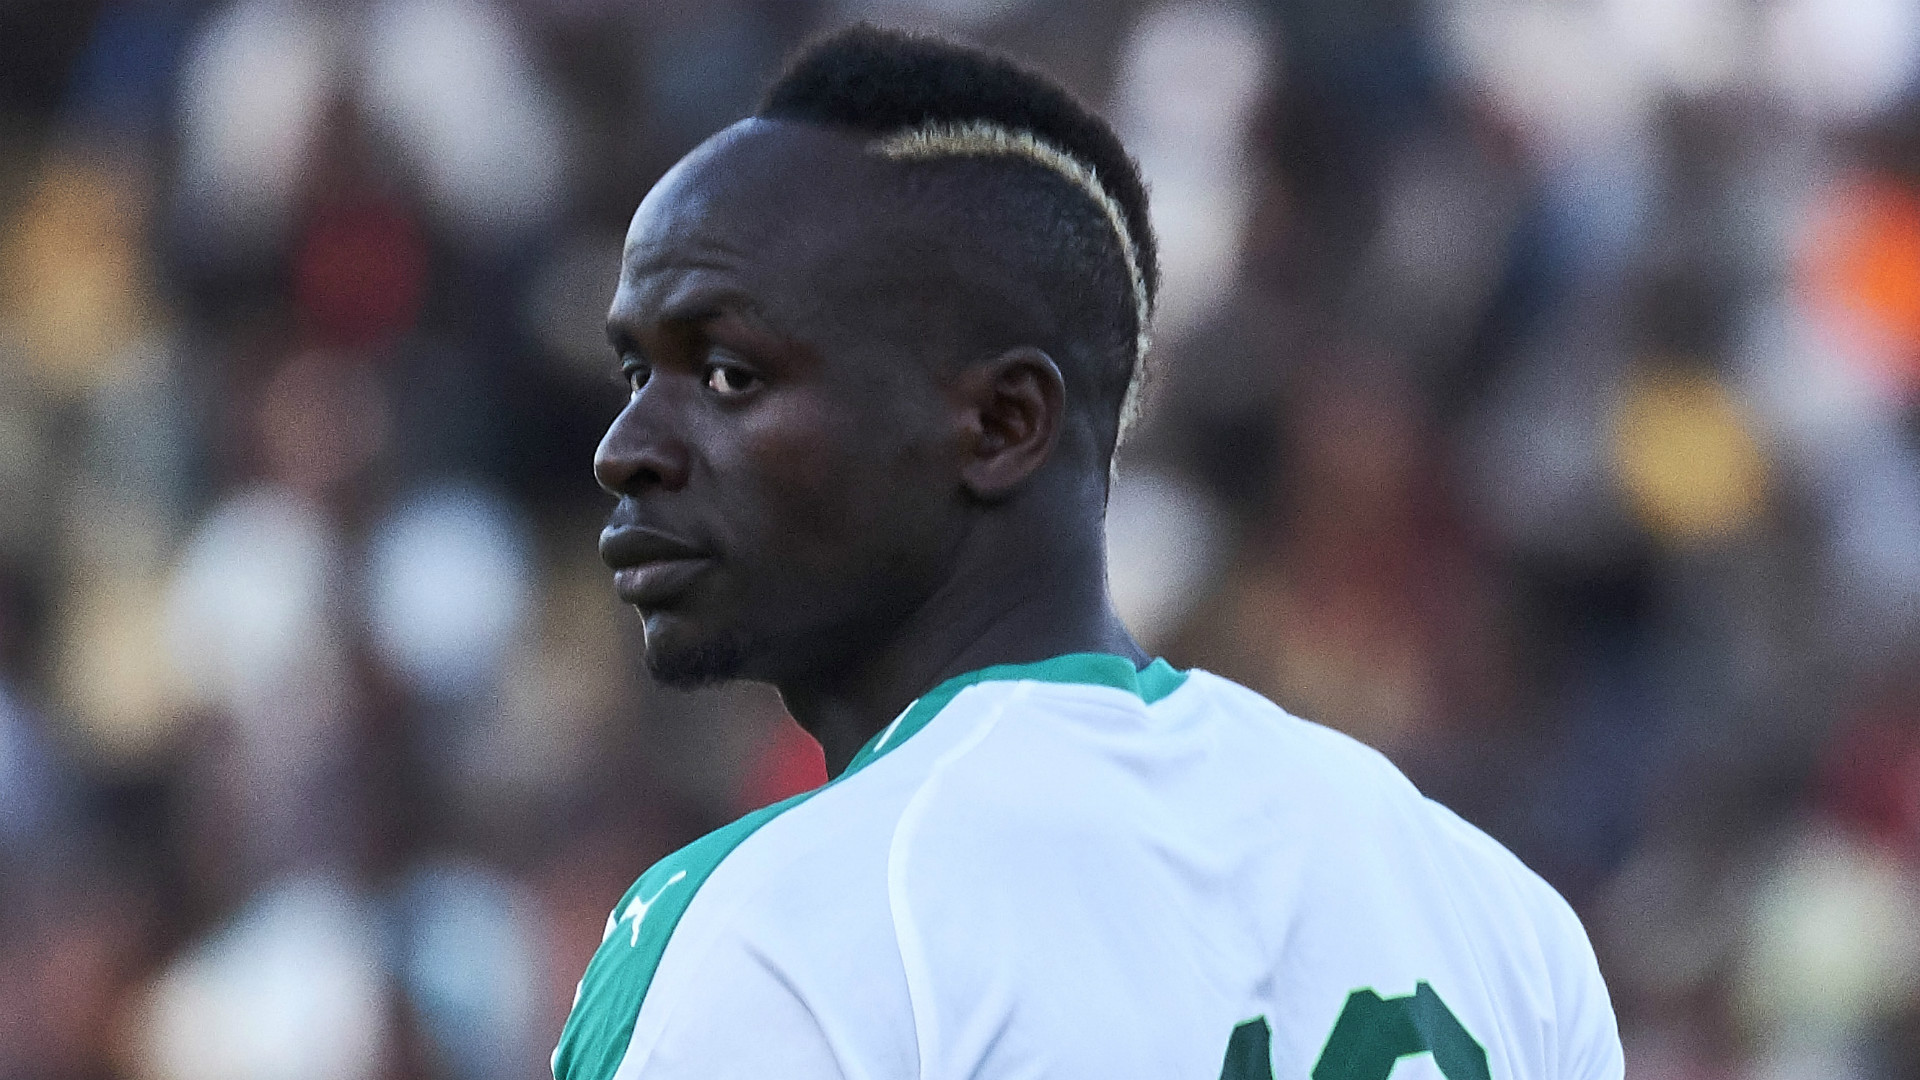 Afcon 2019 Live Blog: Senegal and Tunisia battle for Afcon final spot